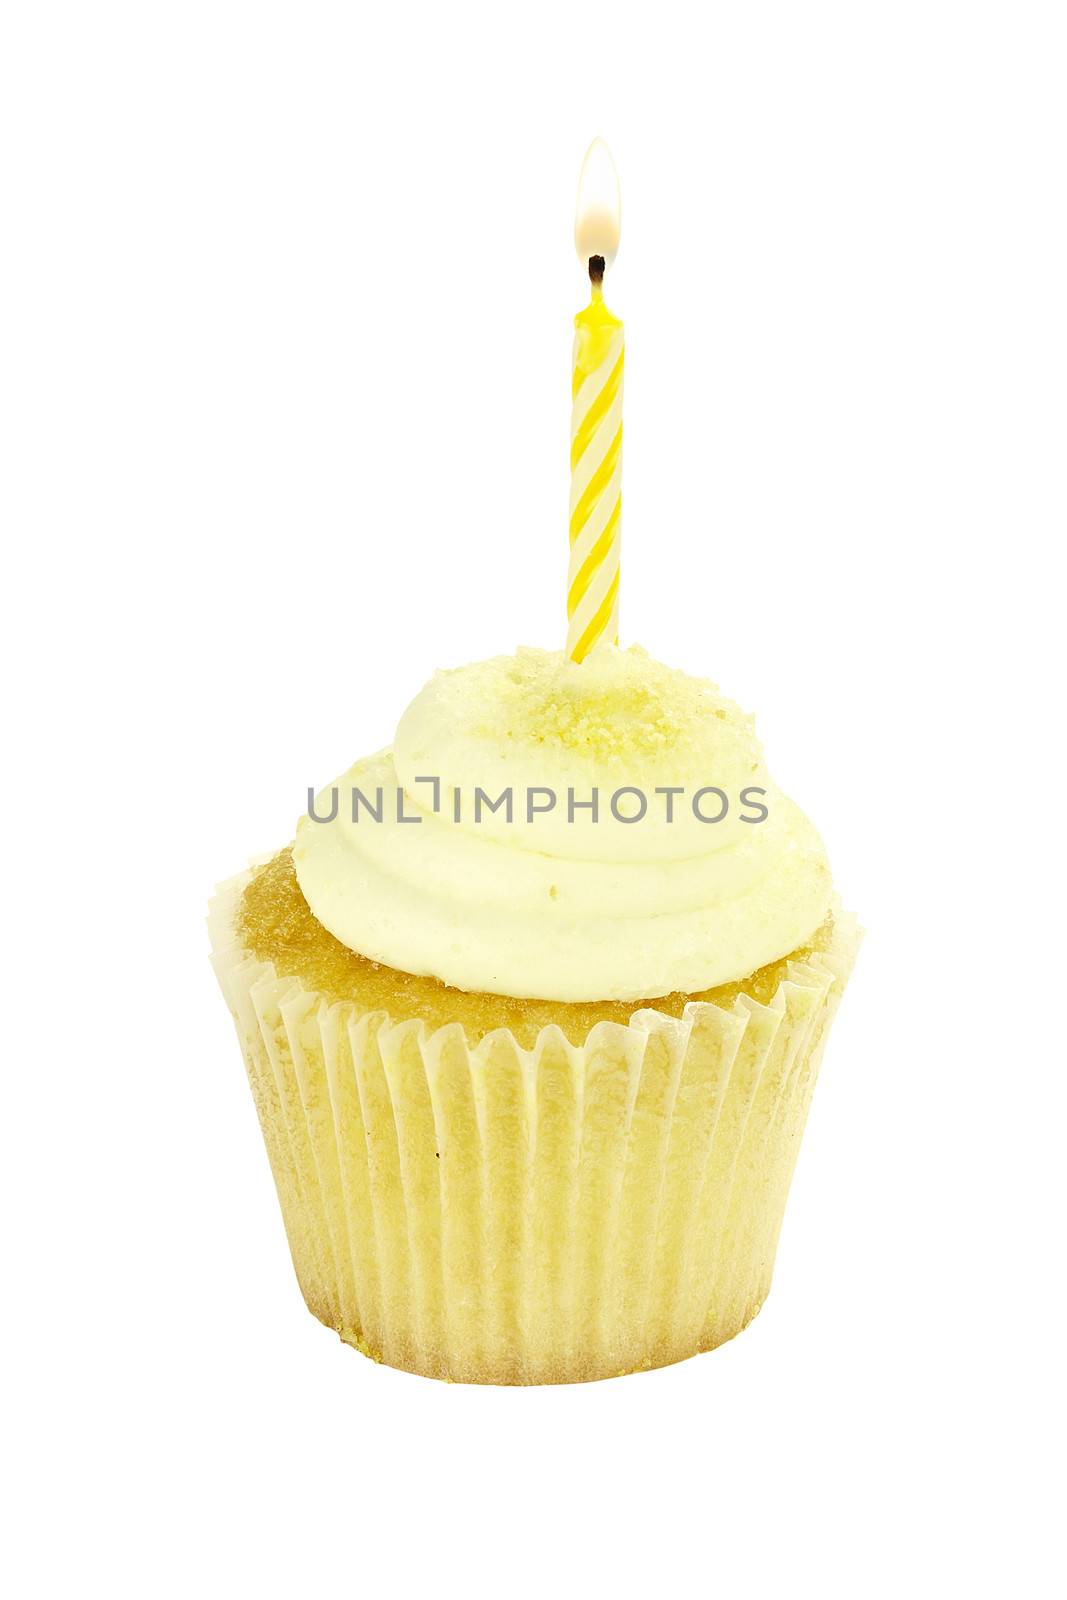 Isolated birthday cupcake with burning candles. Clipping path included.